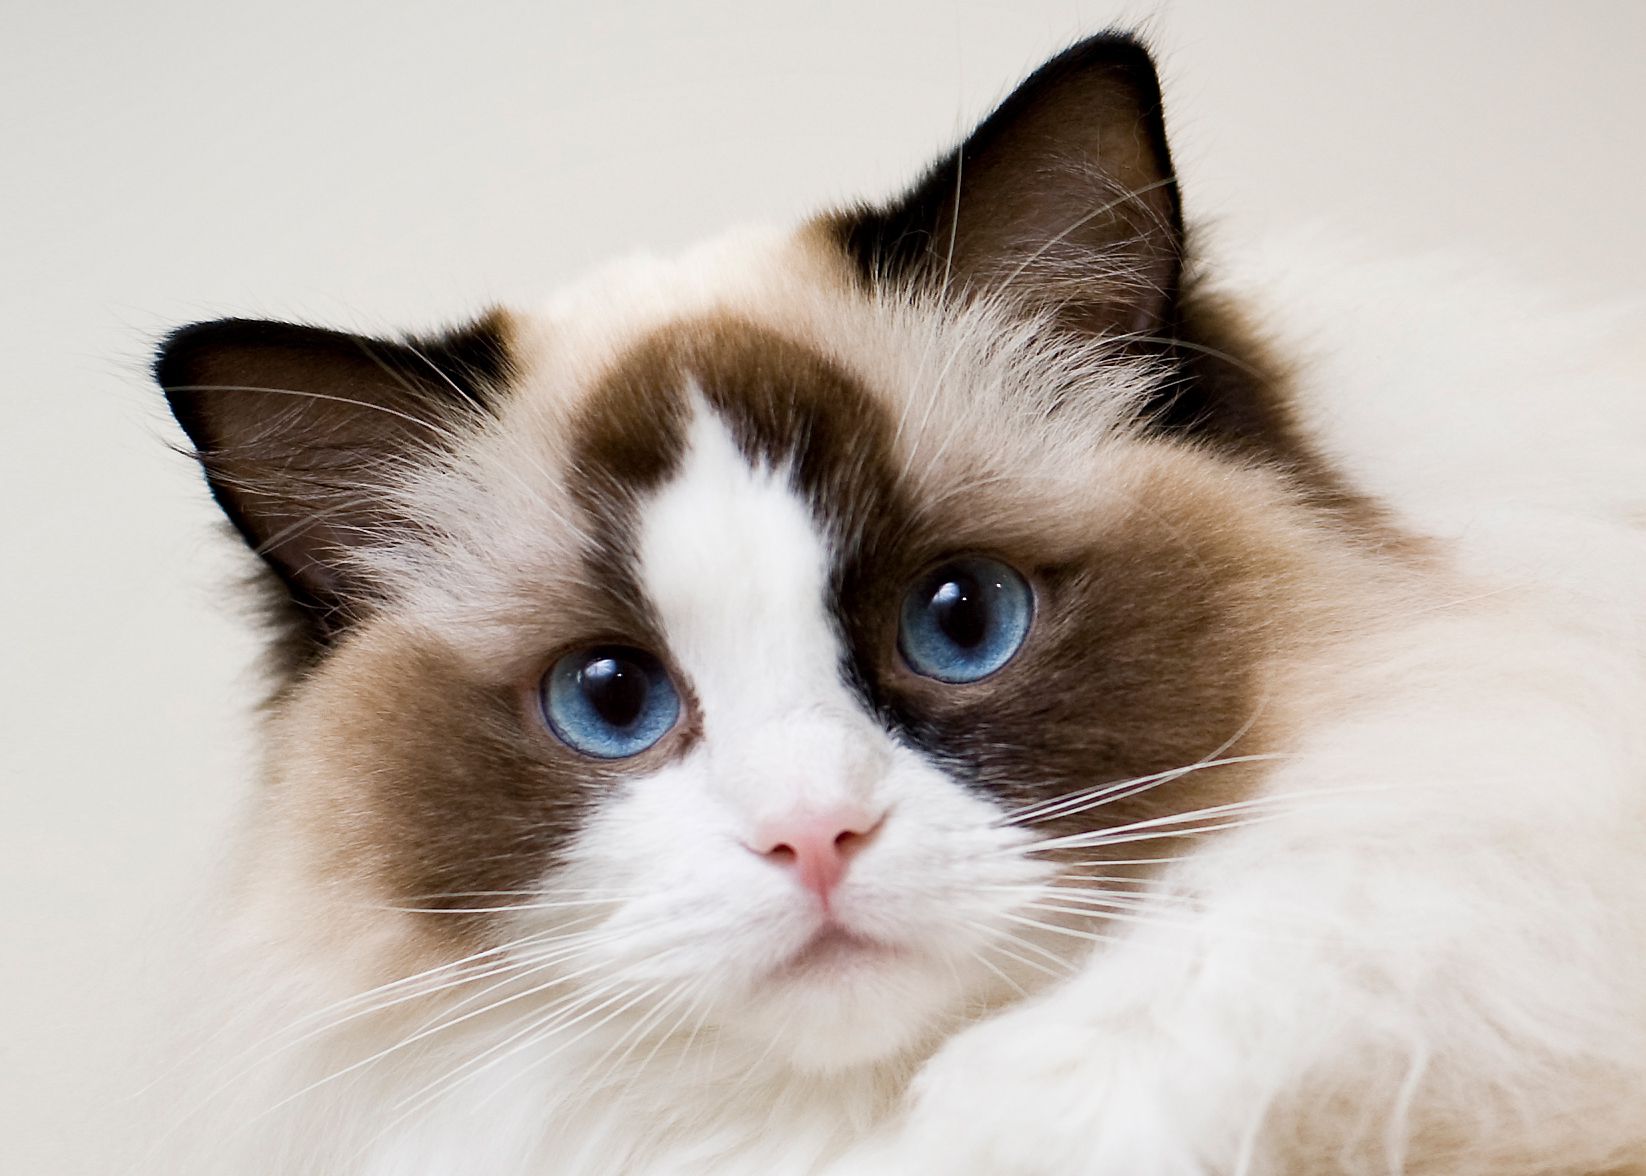 The Ragdoll cat is a unique and beloved breed known for its docile temperament, striking appearance, and affectionate nature.